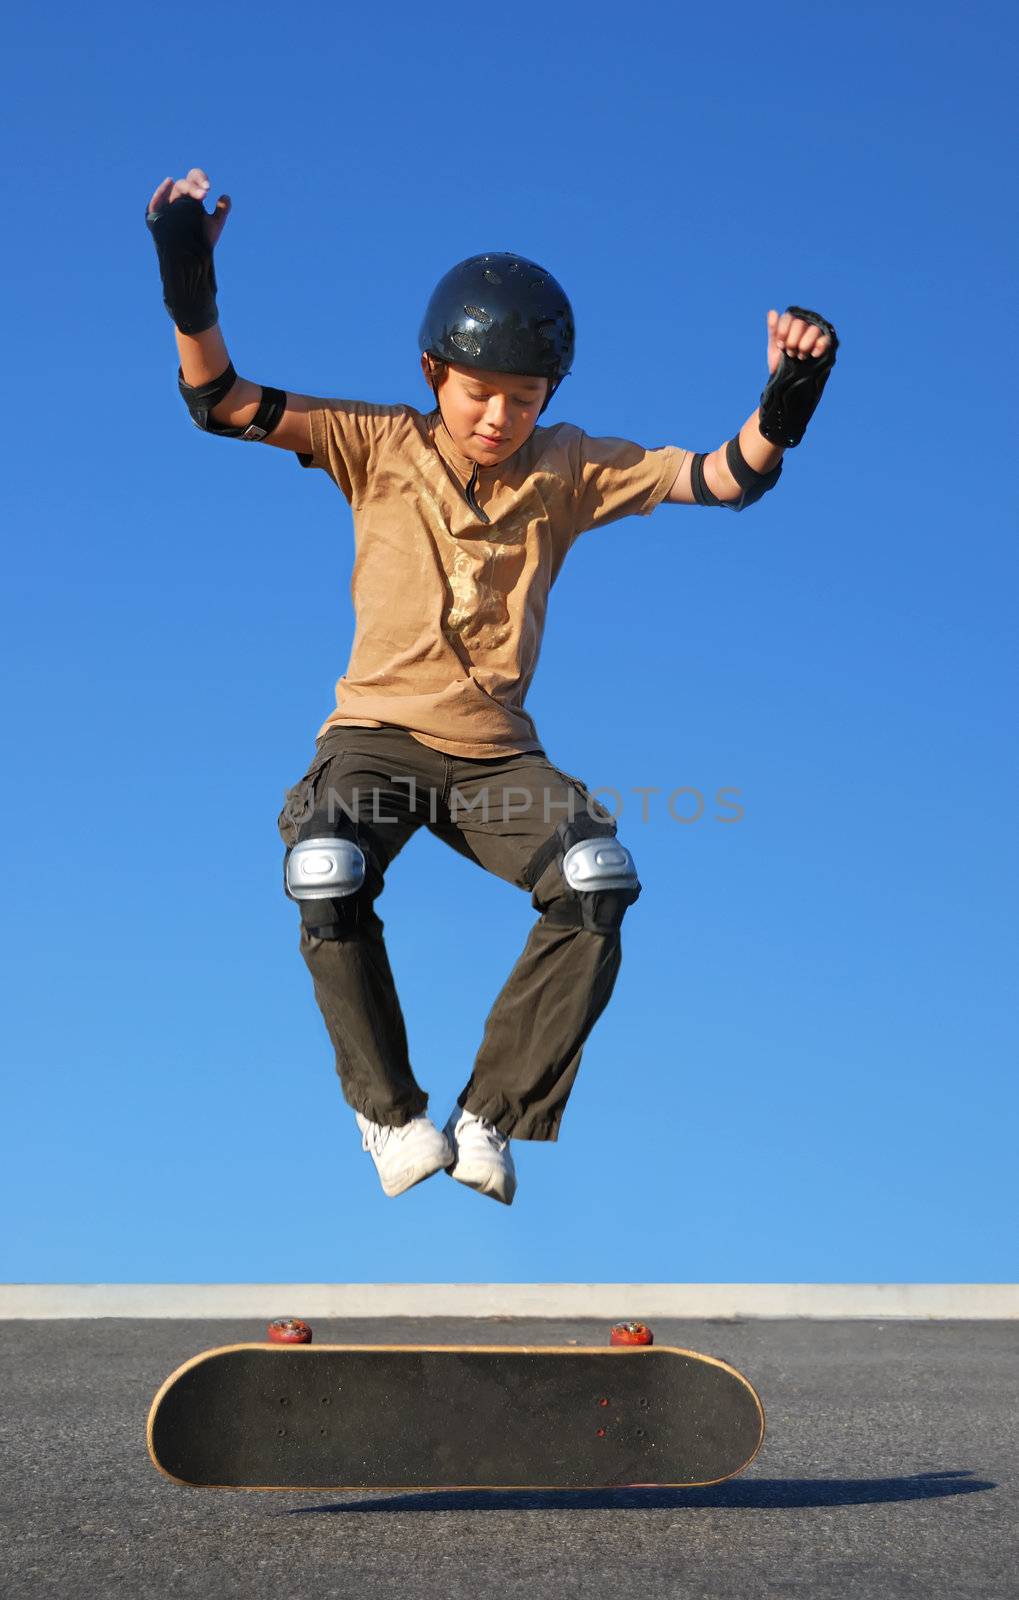 Boy with protective gear jumping high from a skateboard with blue background.